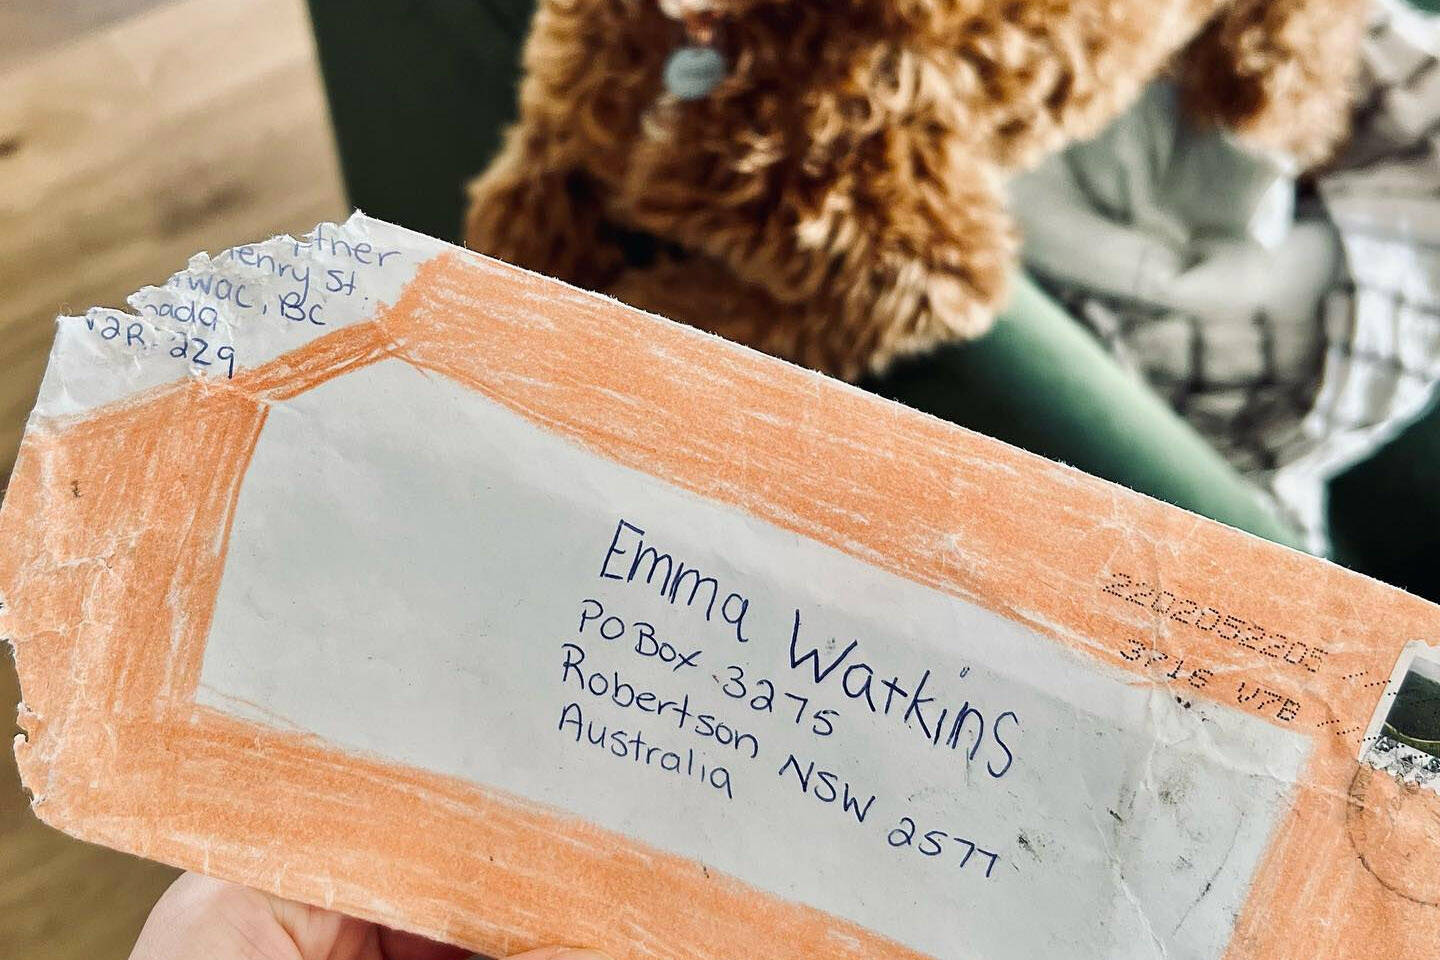 A well-known Australian children’s singer is hoping to get in touch with a fan from Chilliwack who sent her some artwork. The envelope with the return address was damaged by her dog Patch. (Emma Watkins/ Facebook)